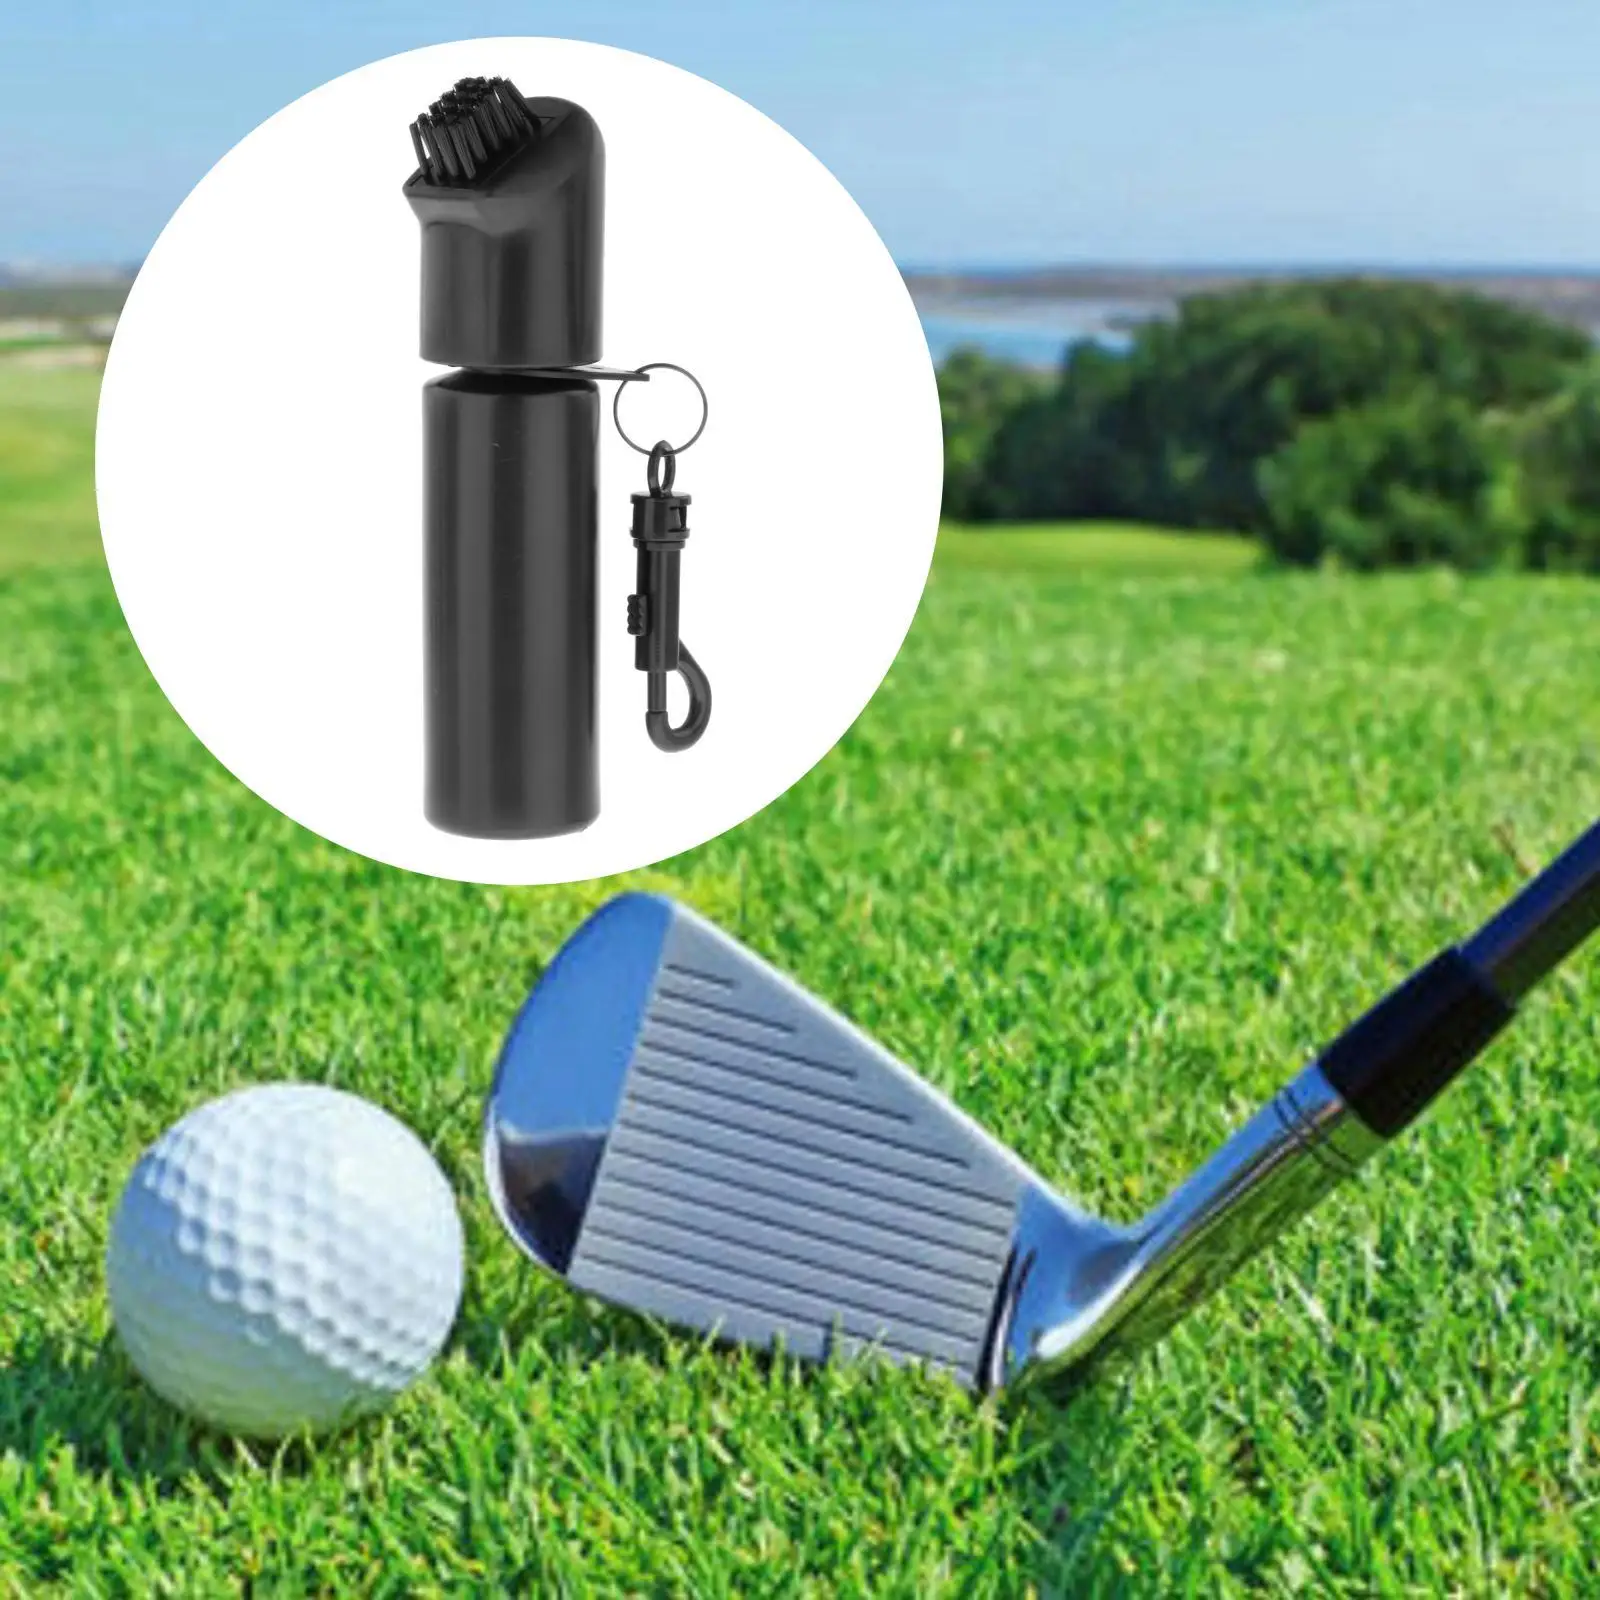 Portable Golf Club Brush, Groove Cleaner, Wide Coverage Self Contained Water